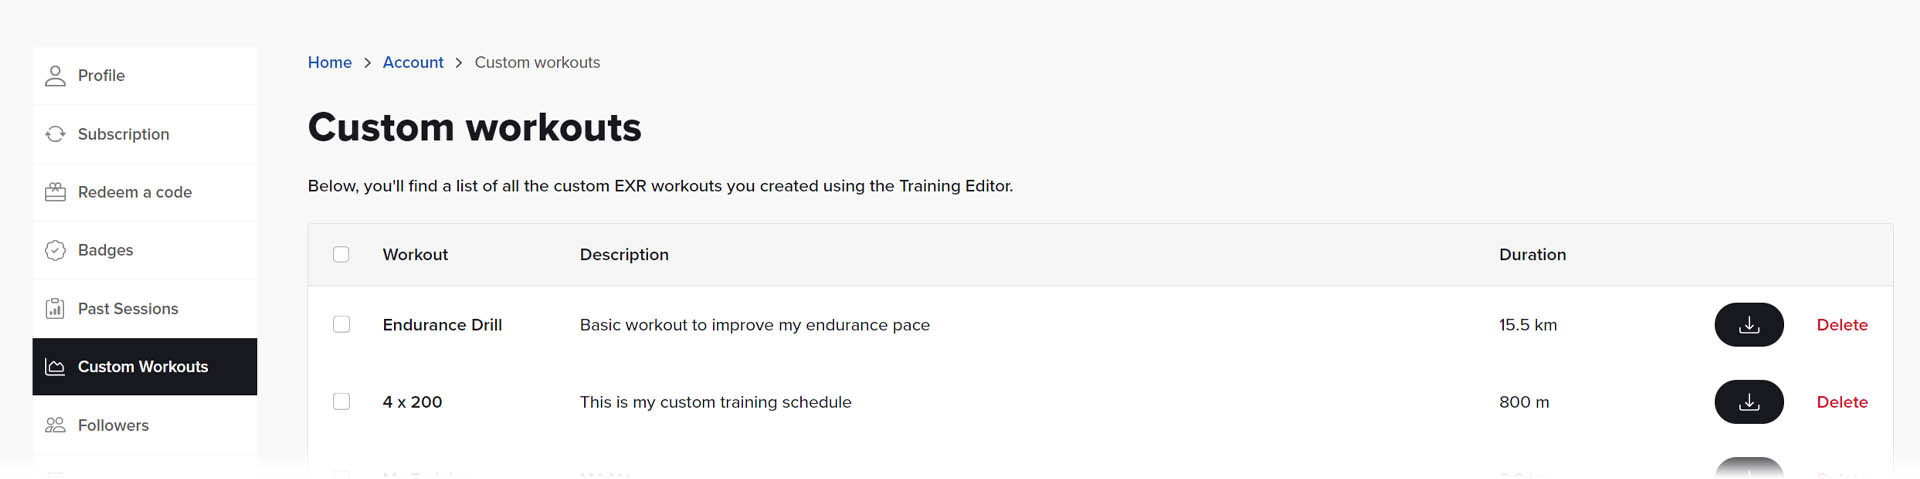 Download and upload custom EXR workouts using your web profile.